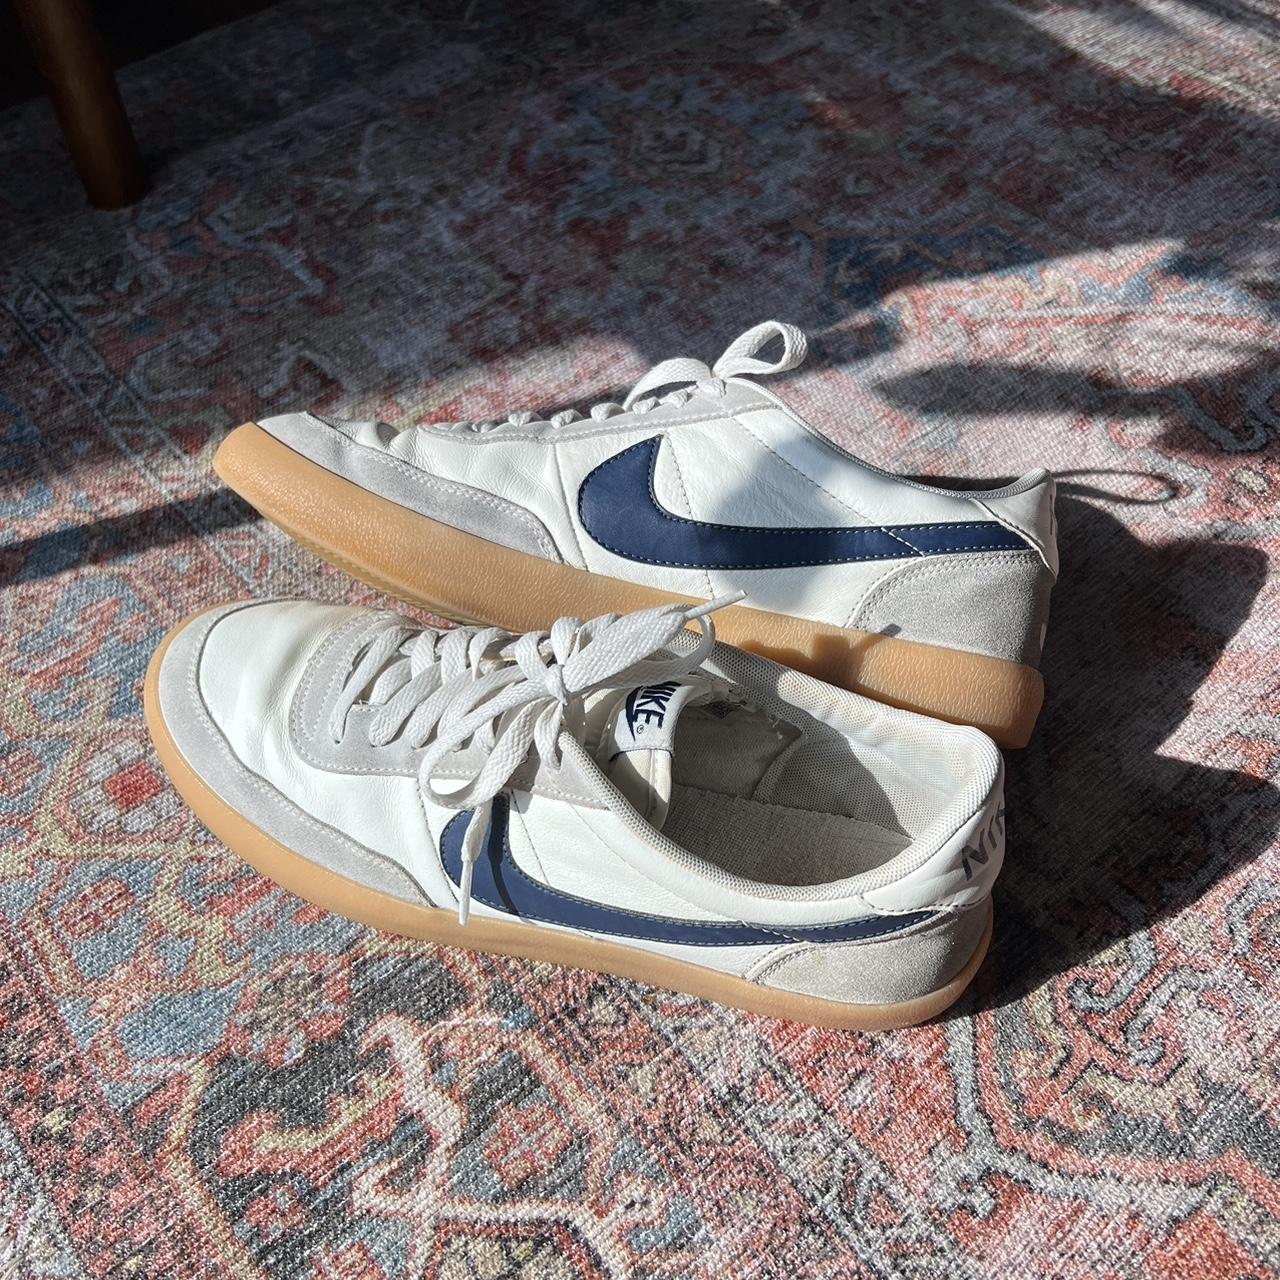 Nike Men's Cream and Navy Trainers